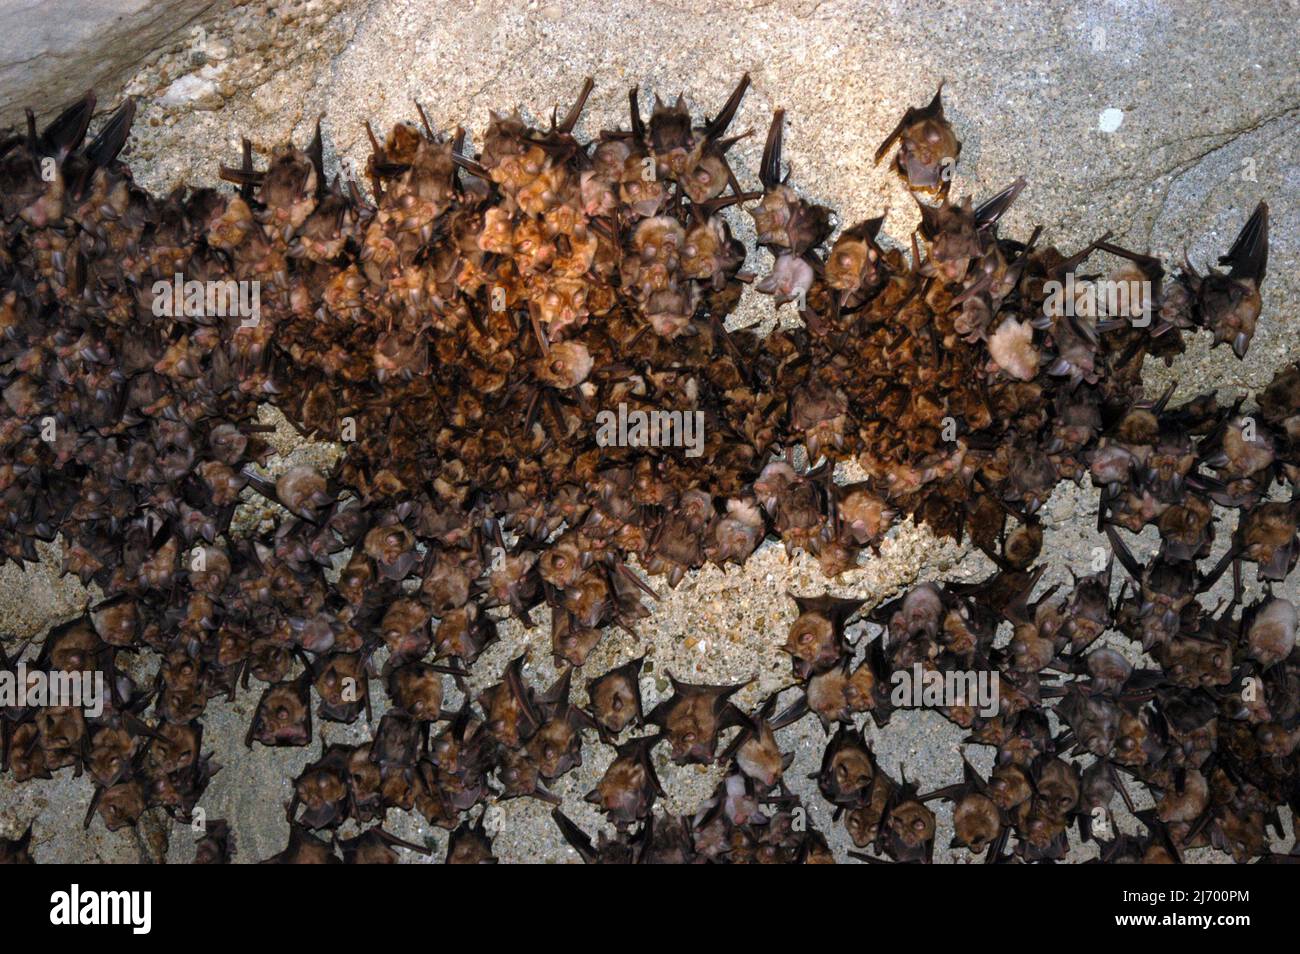 Group of sleeping bats colony in a cave. Caucasus mountains, Georgia Stock Photo